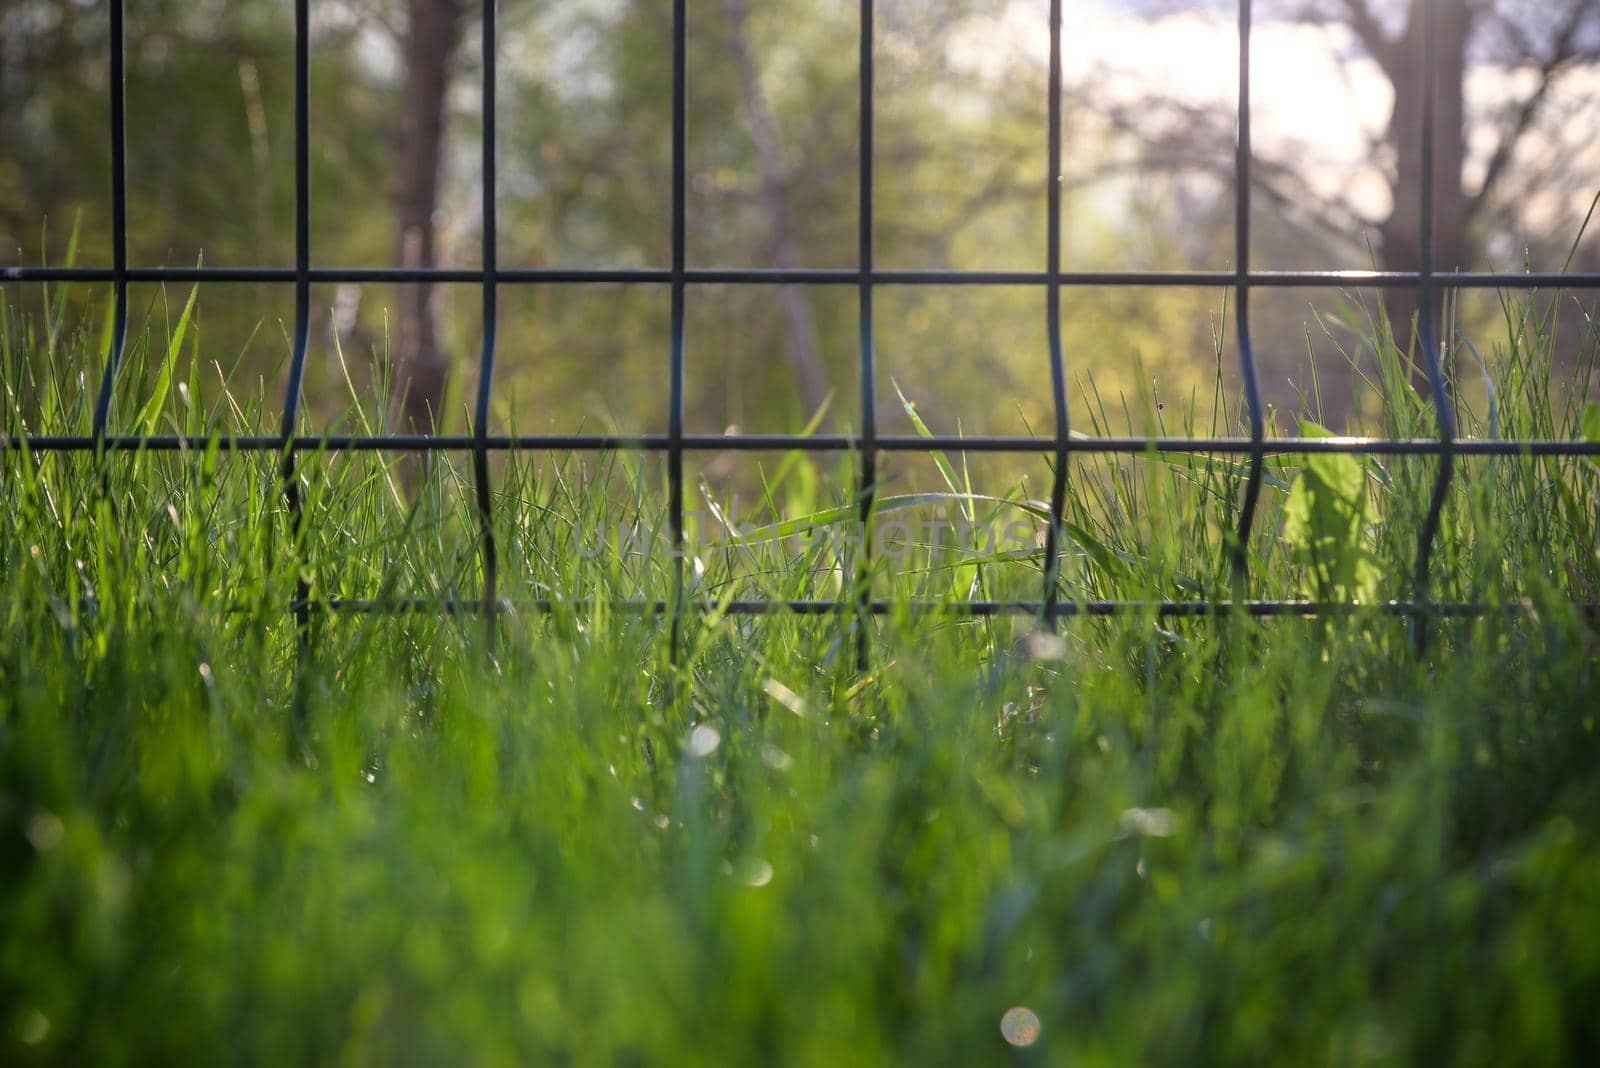 Green steel wire fence with rods. Protecting private property. Selective focus.